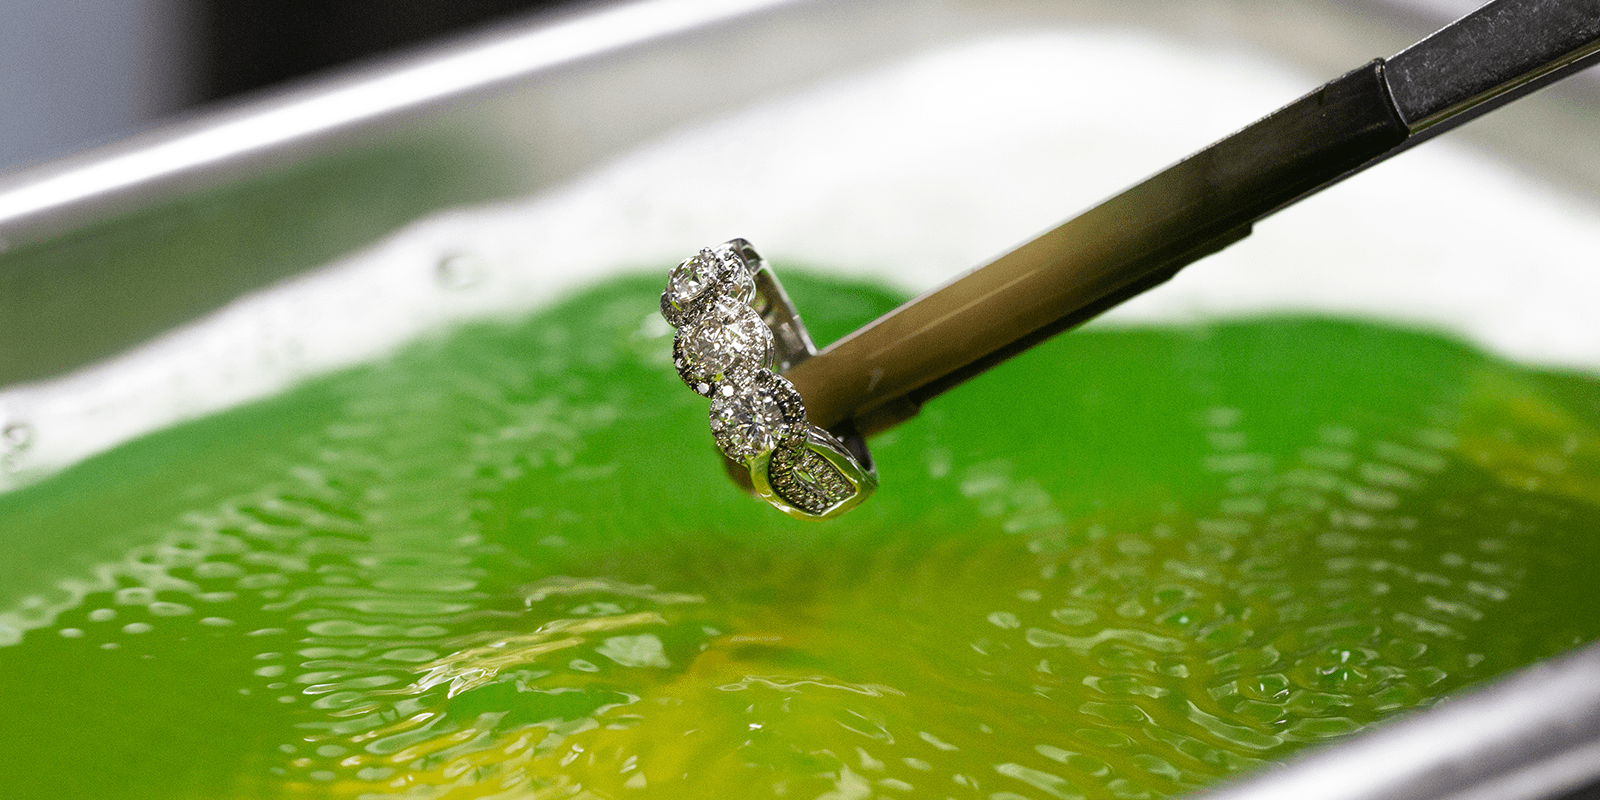 Photo of diamond ring being cleaned in ultrasonic cleaner.